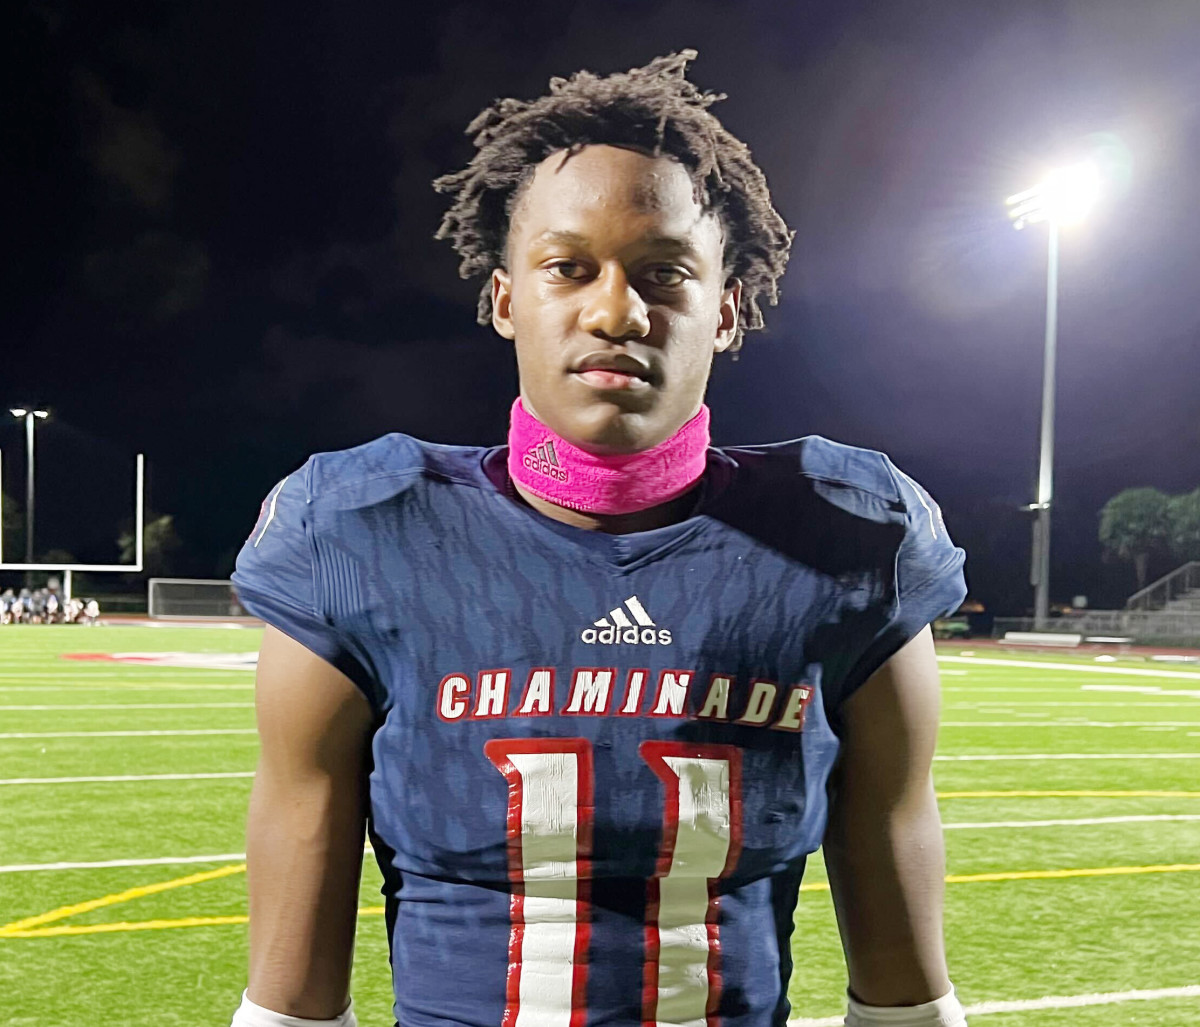 Chaminade-Madona star quarterback Cedric Bailey connected for long touchdowns with his first two throws of the night and finished with three TD throws in his team's 63-0 victory on Thursday.